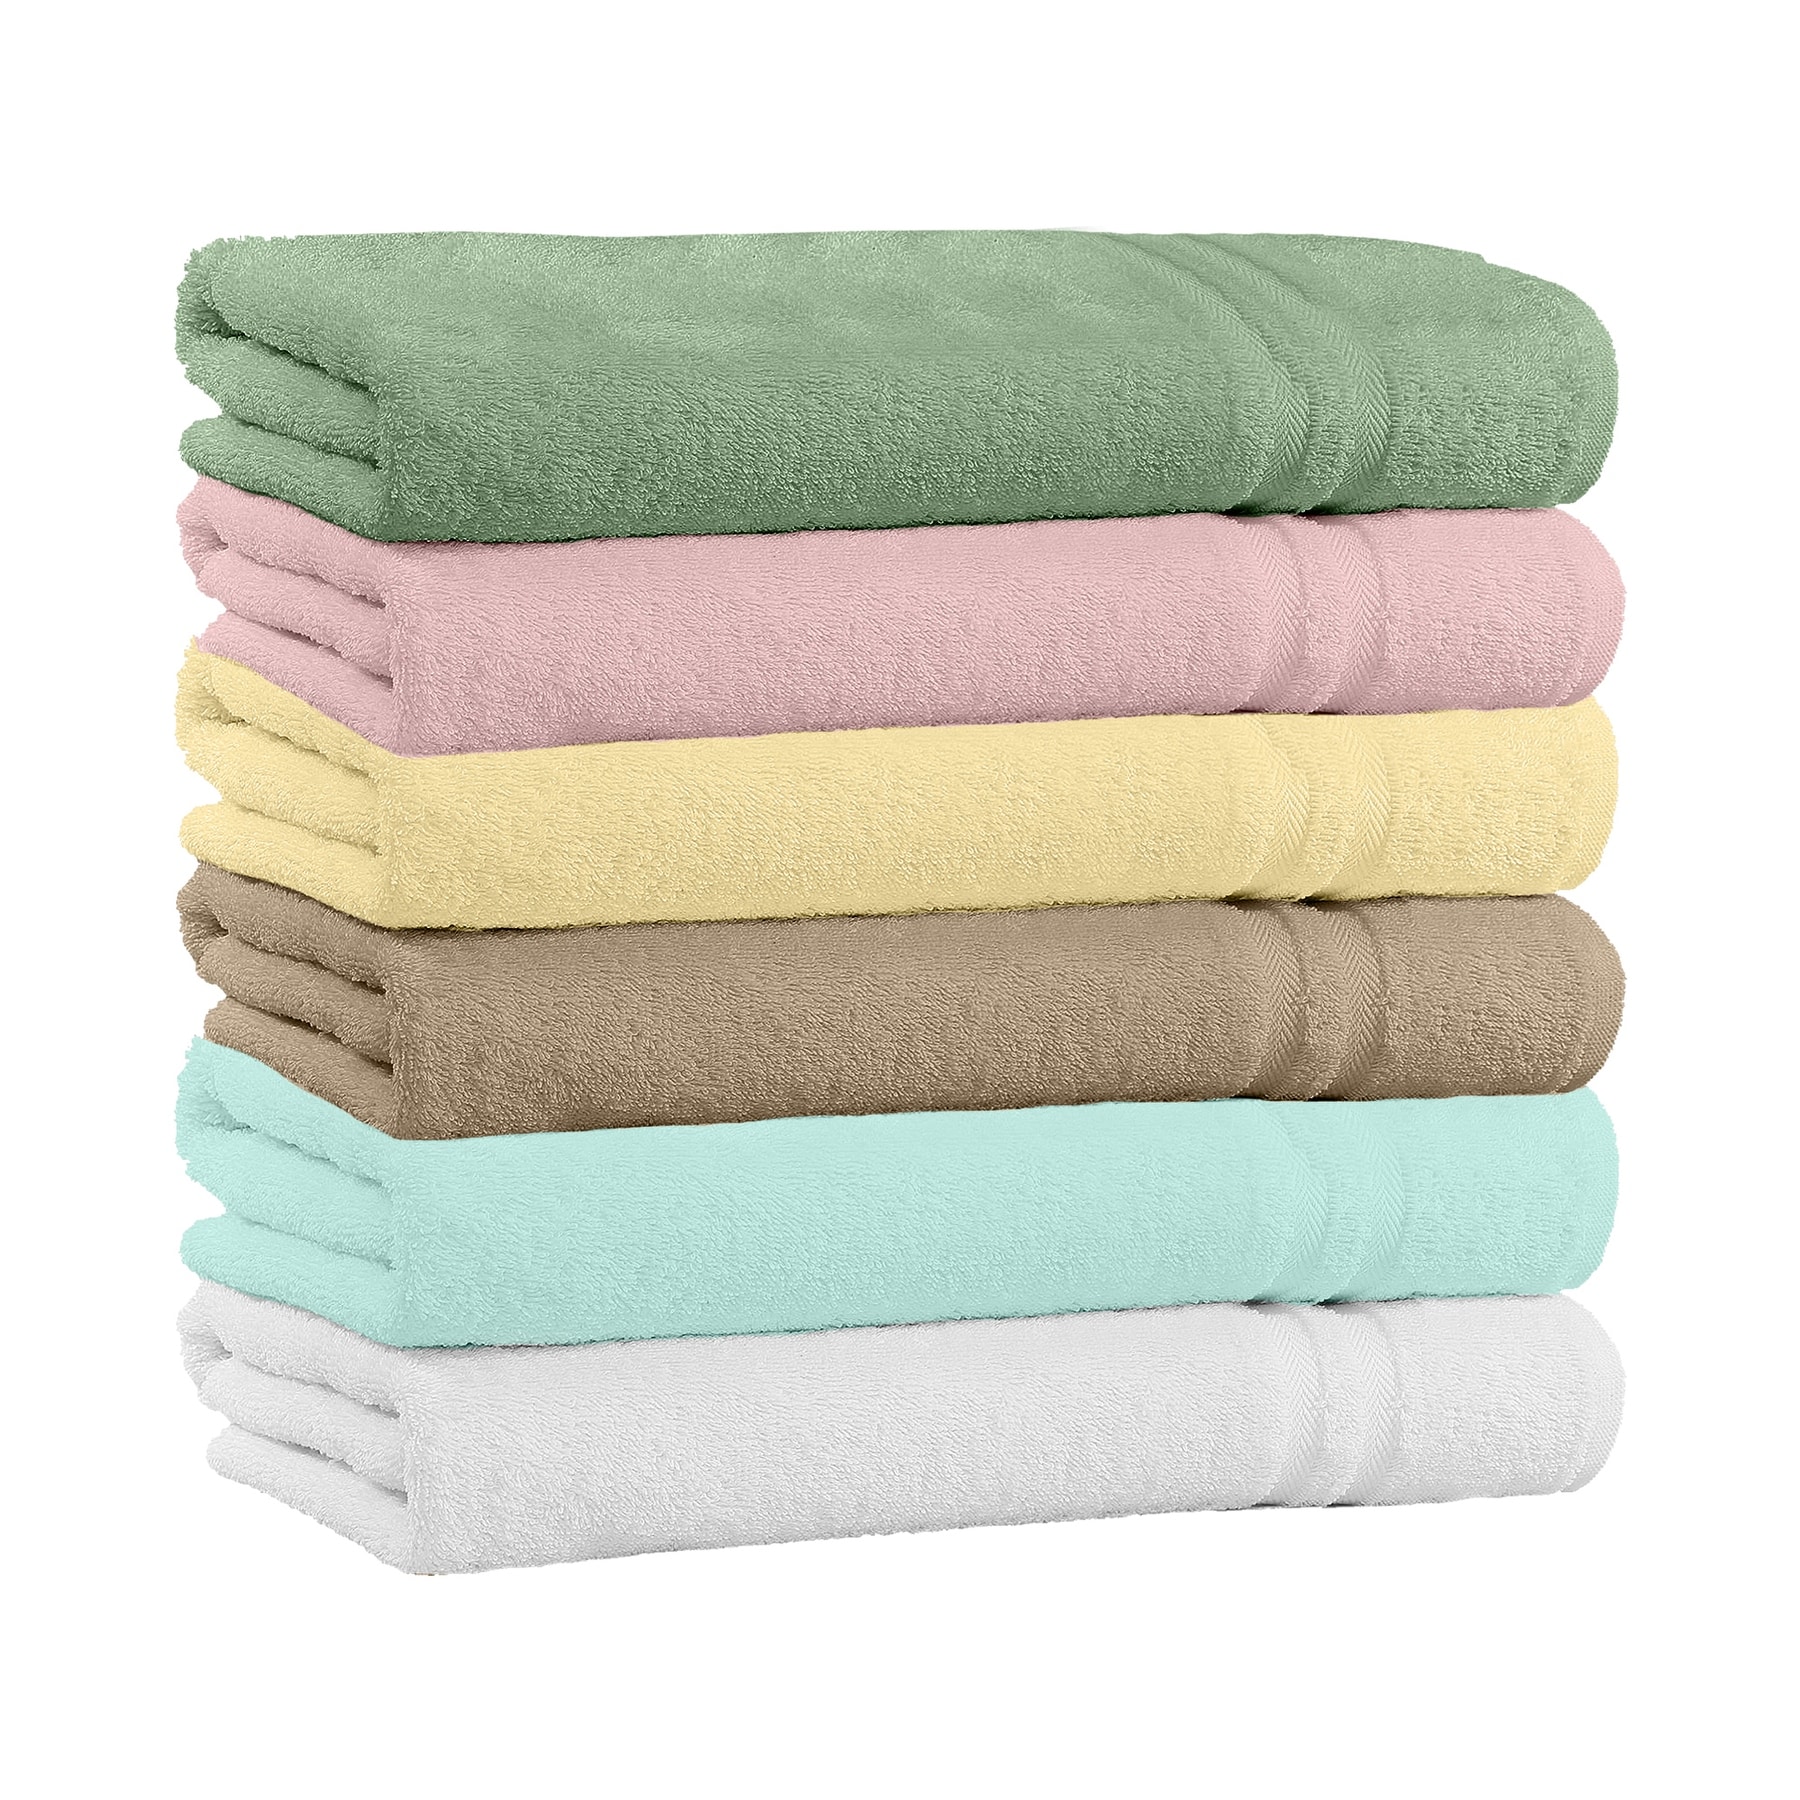 https://ak1.ostkcdn.com/images/products/is/images/direct/bbad26c39f78610136c0b1e2ab377ebecc90ce27/5-Pack-100%25-Cotton-Extra-Plush-%26-Absorbent-Bath-Towels.jpg